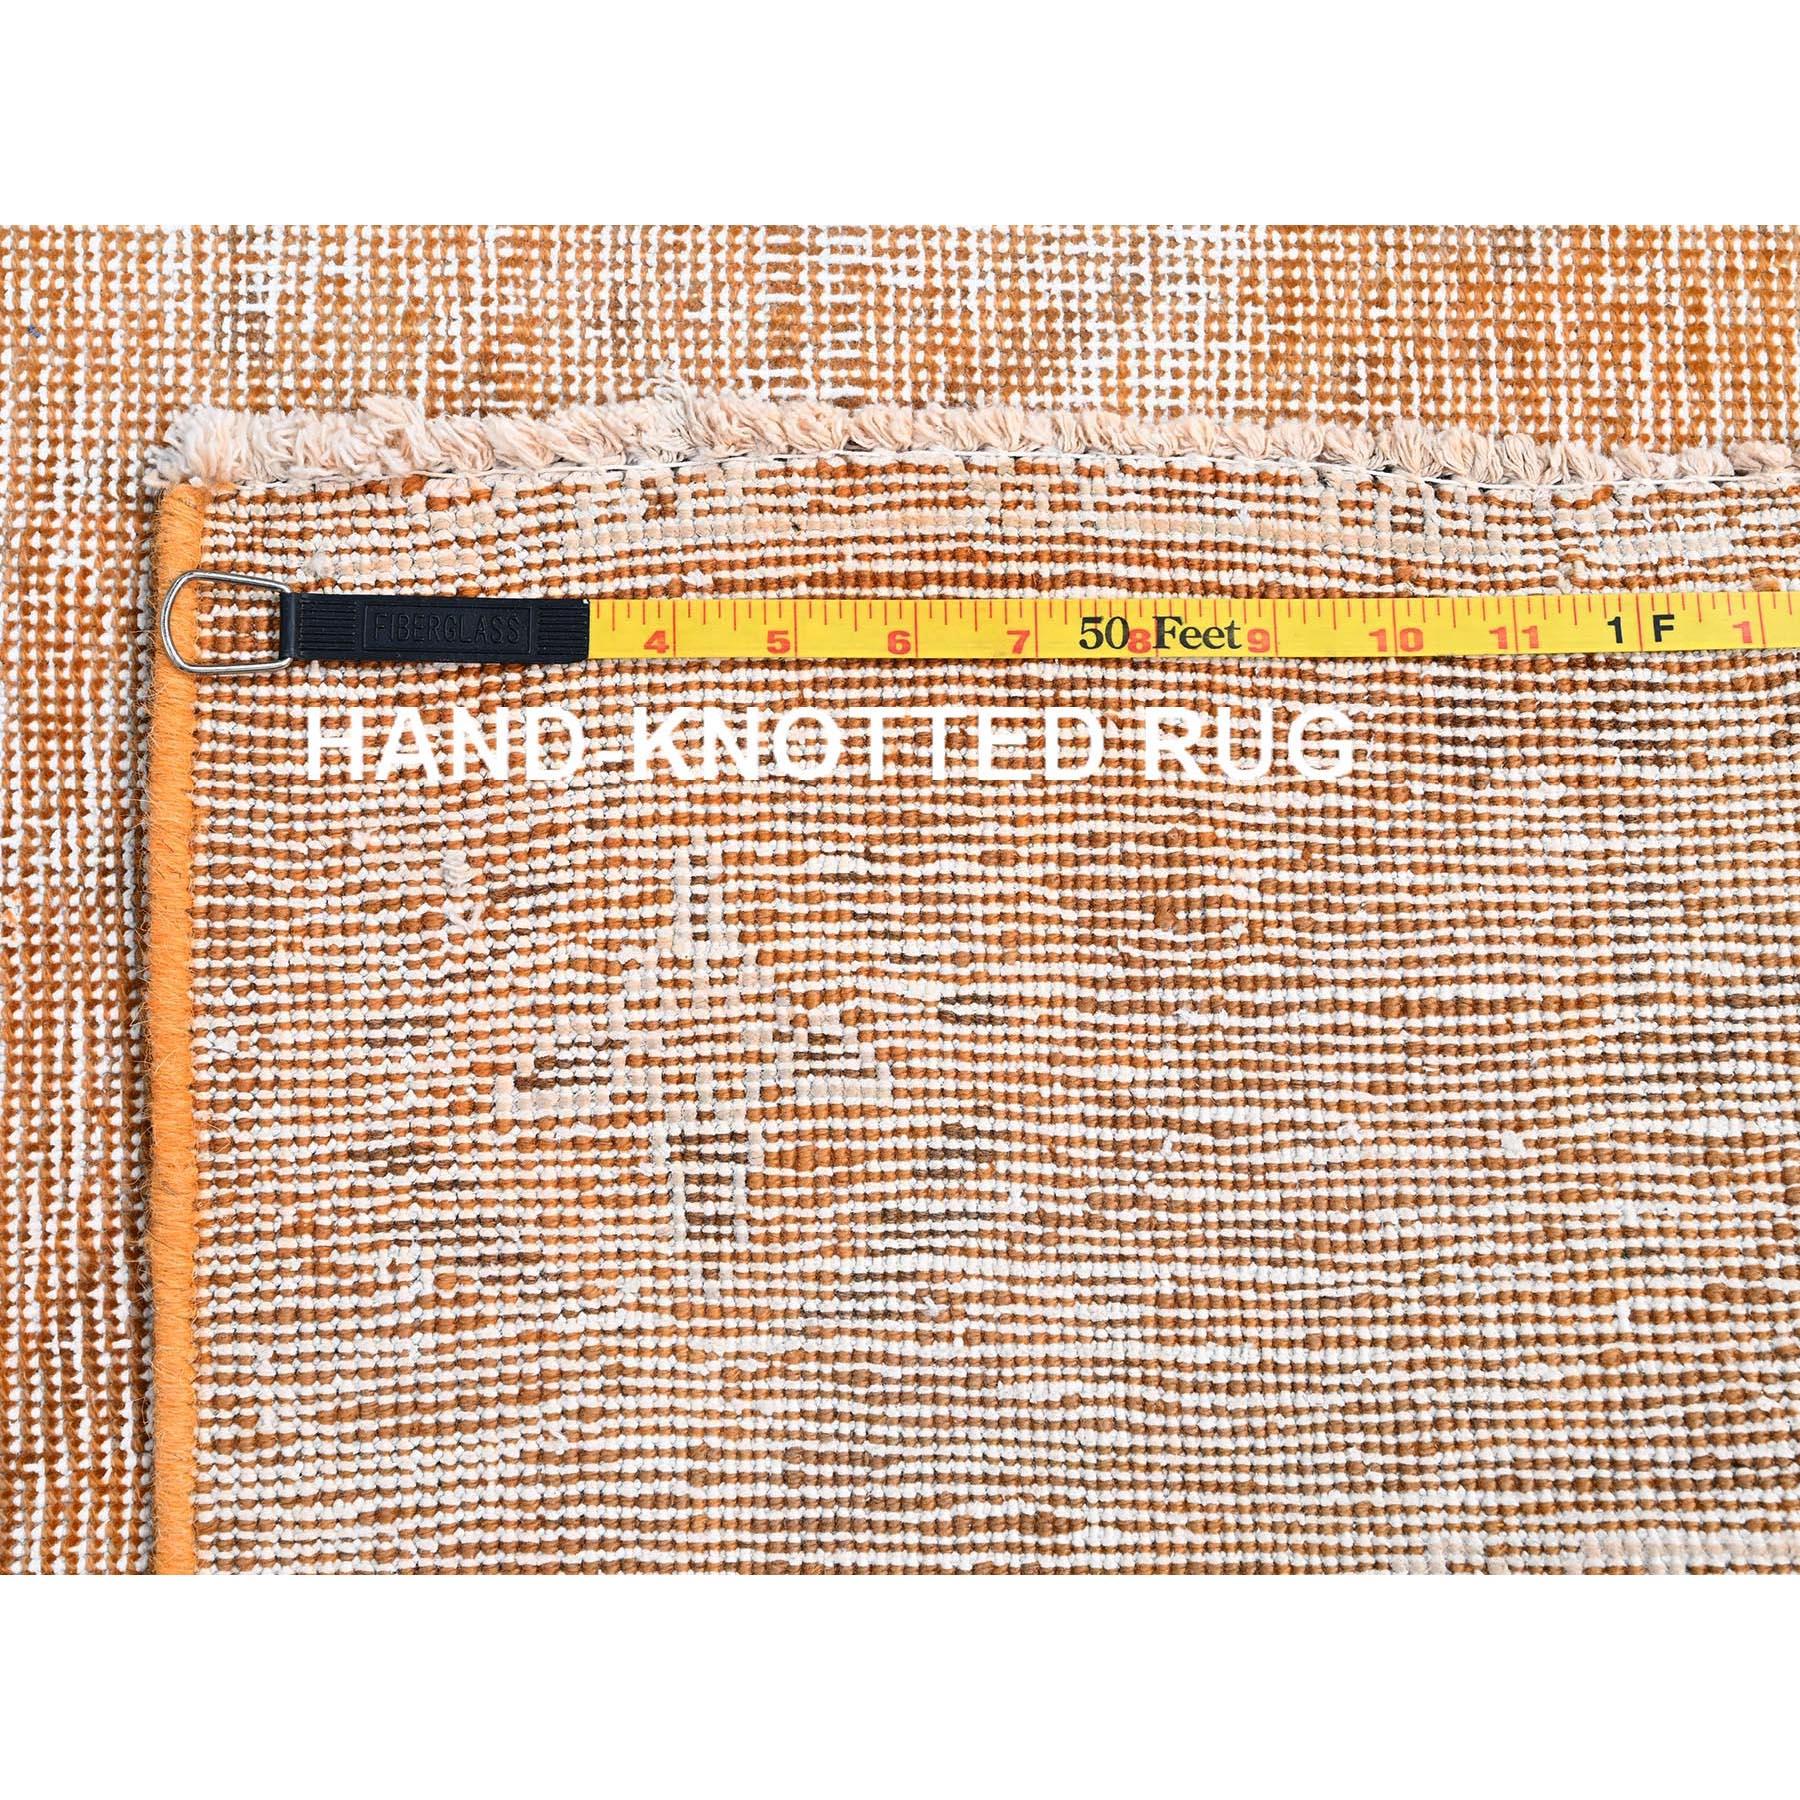 This fabulous Hand-Knotted carpet has been created and designed for extra strength and durability. This rug has been handcrafted for weeks in the traditional method that is used to make'
Exact Rug Size in Feet and Inches : 6'1